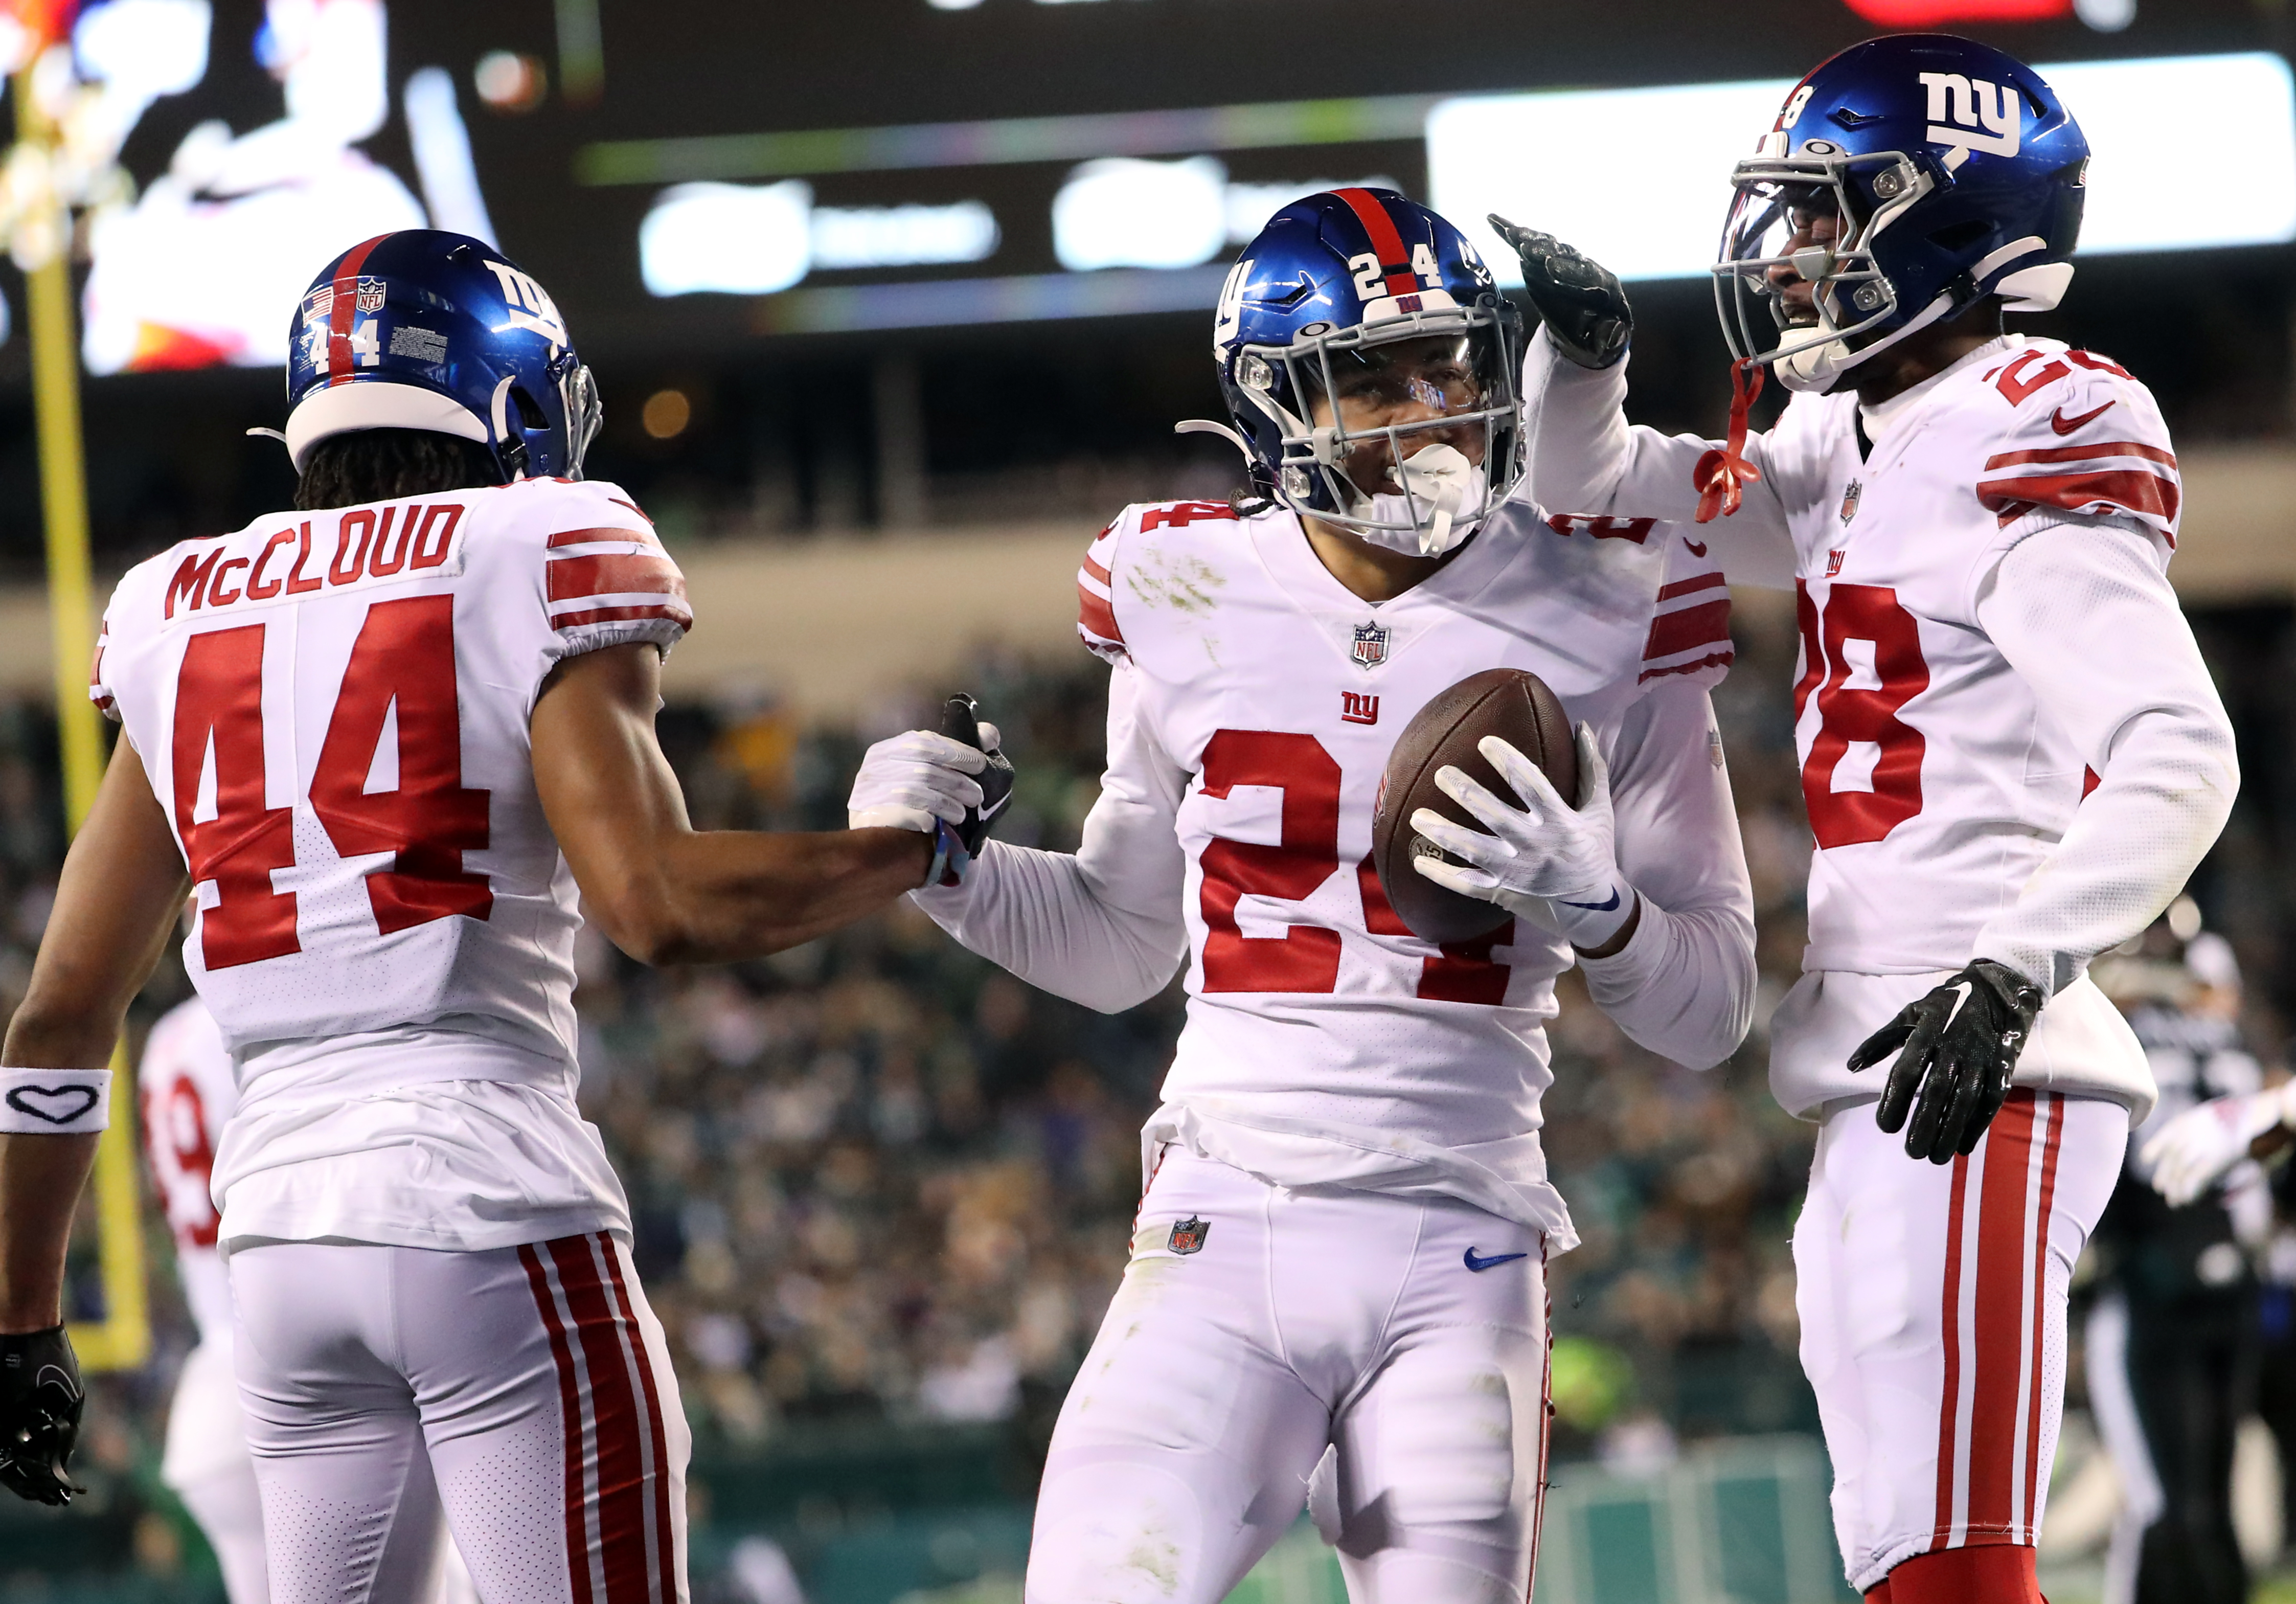 Giants vs. Vikings: Date, time, TV schedule for playoff game